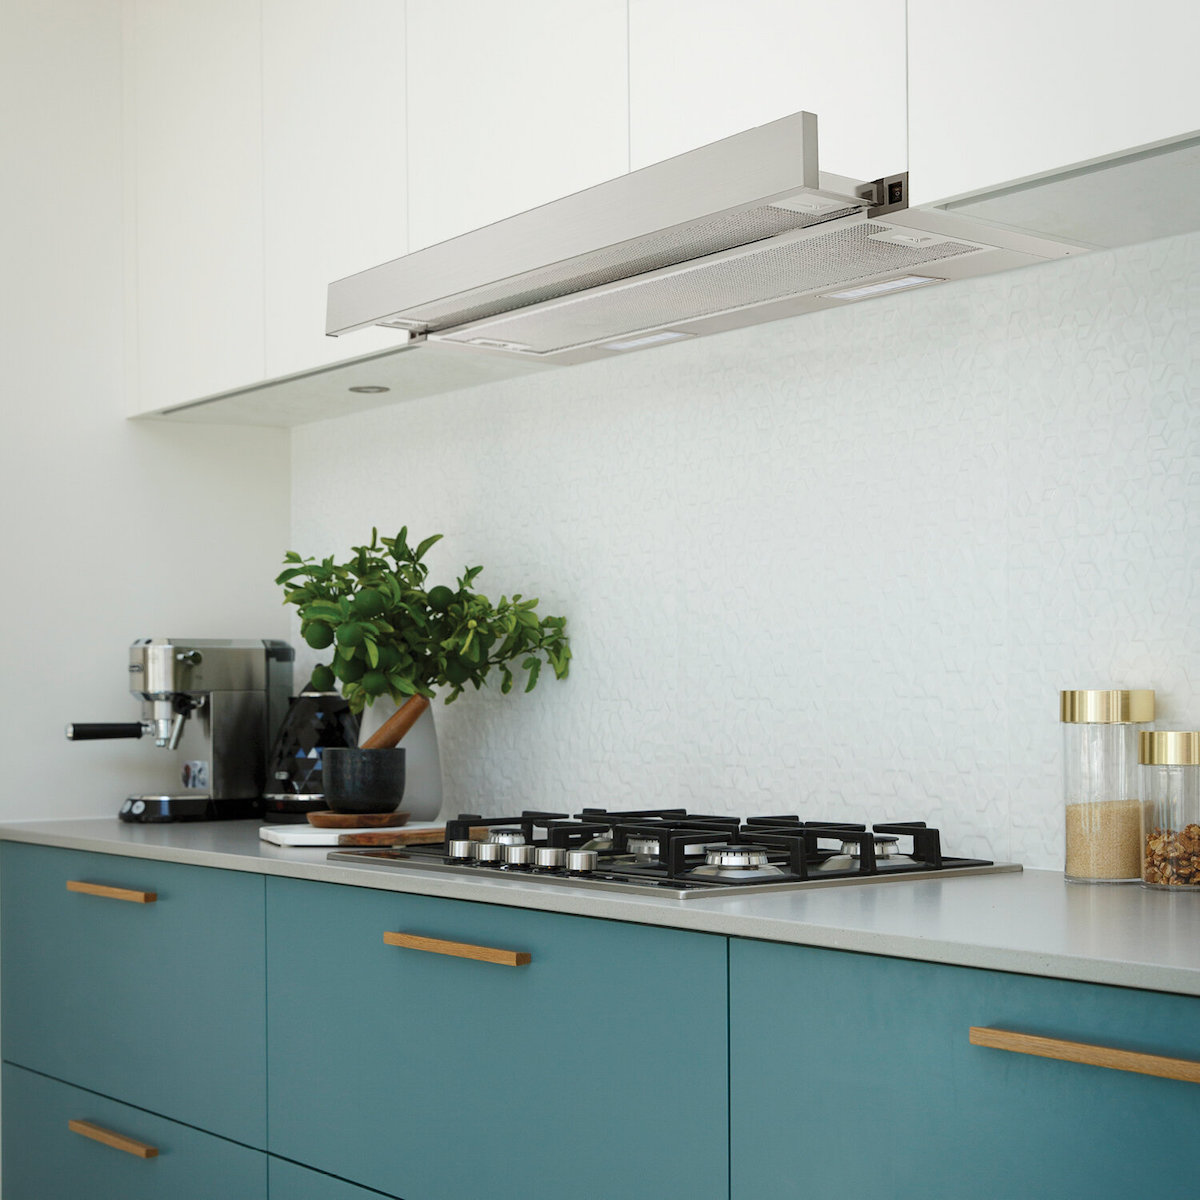 A slide-out range hood in a white and teal kitchen.